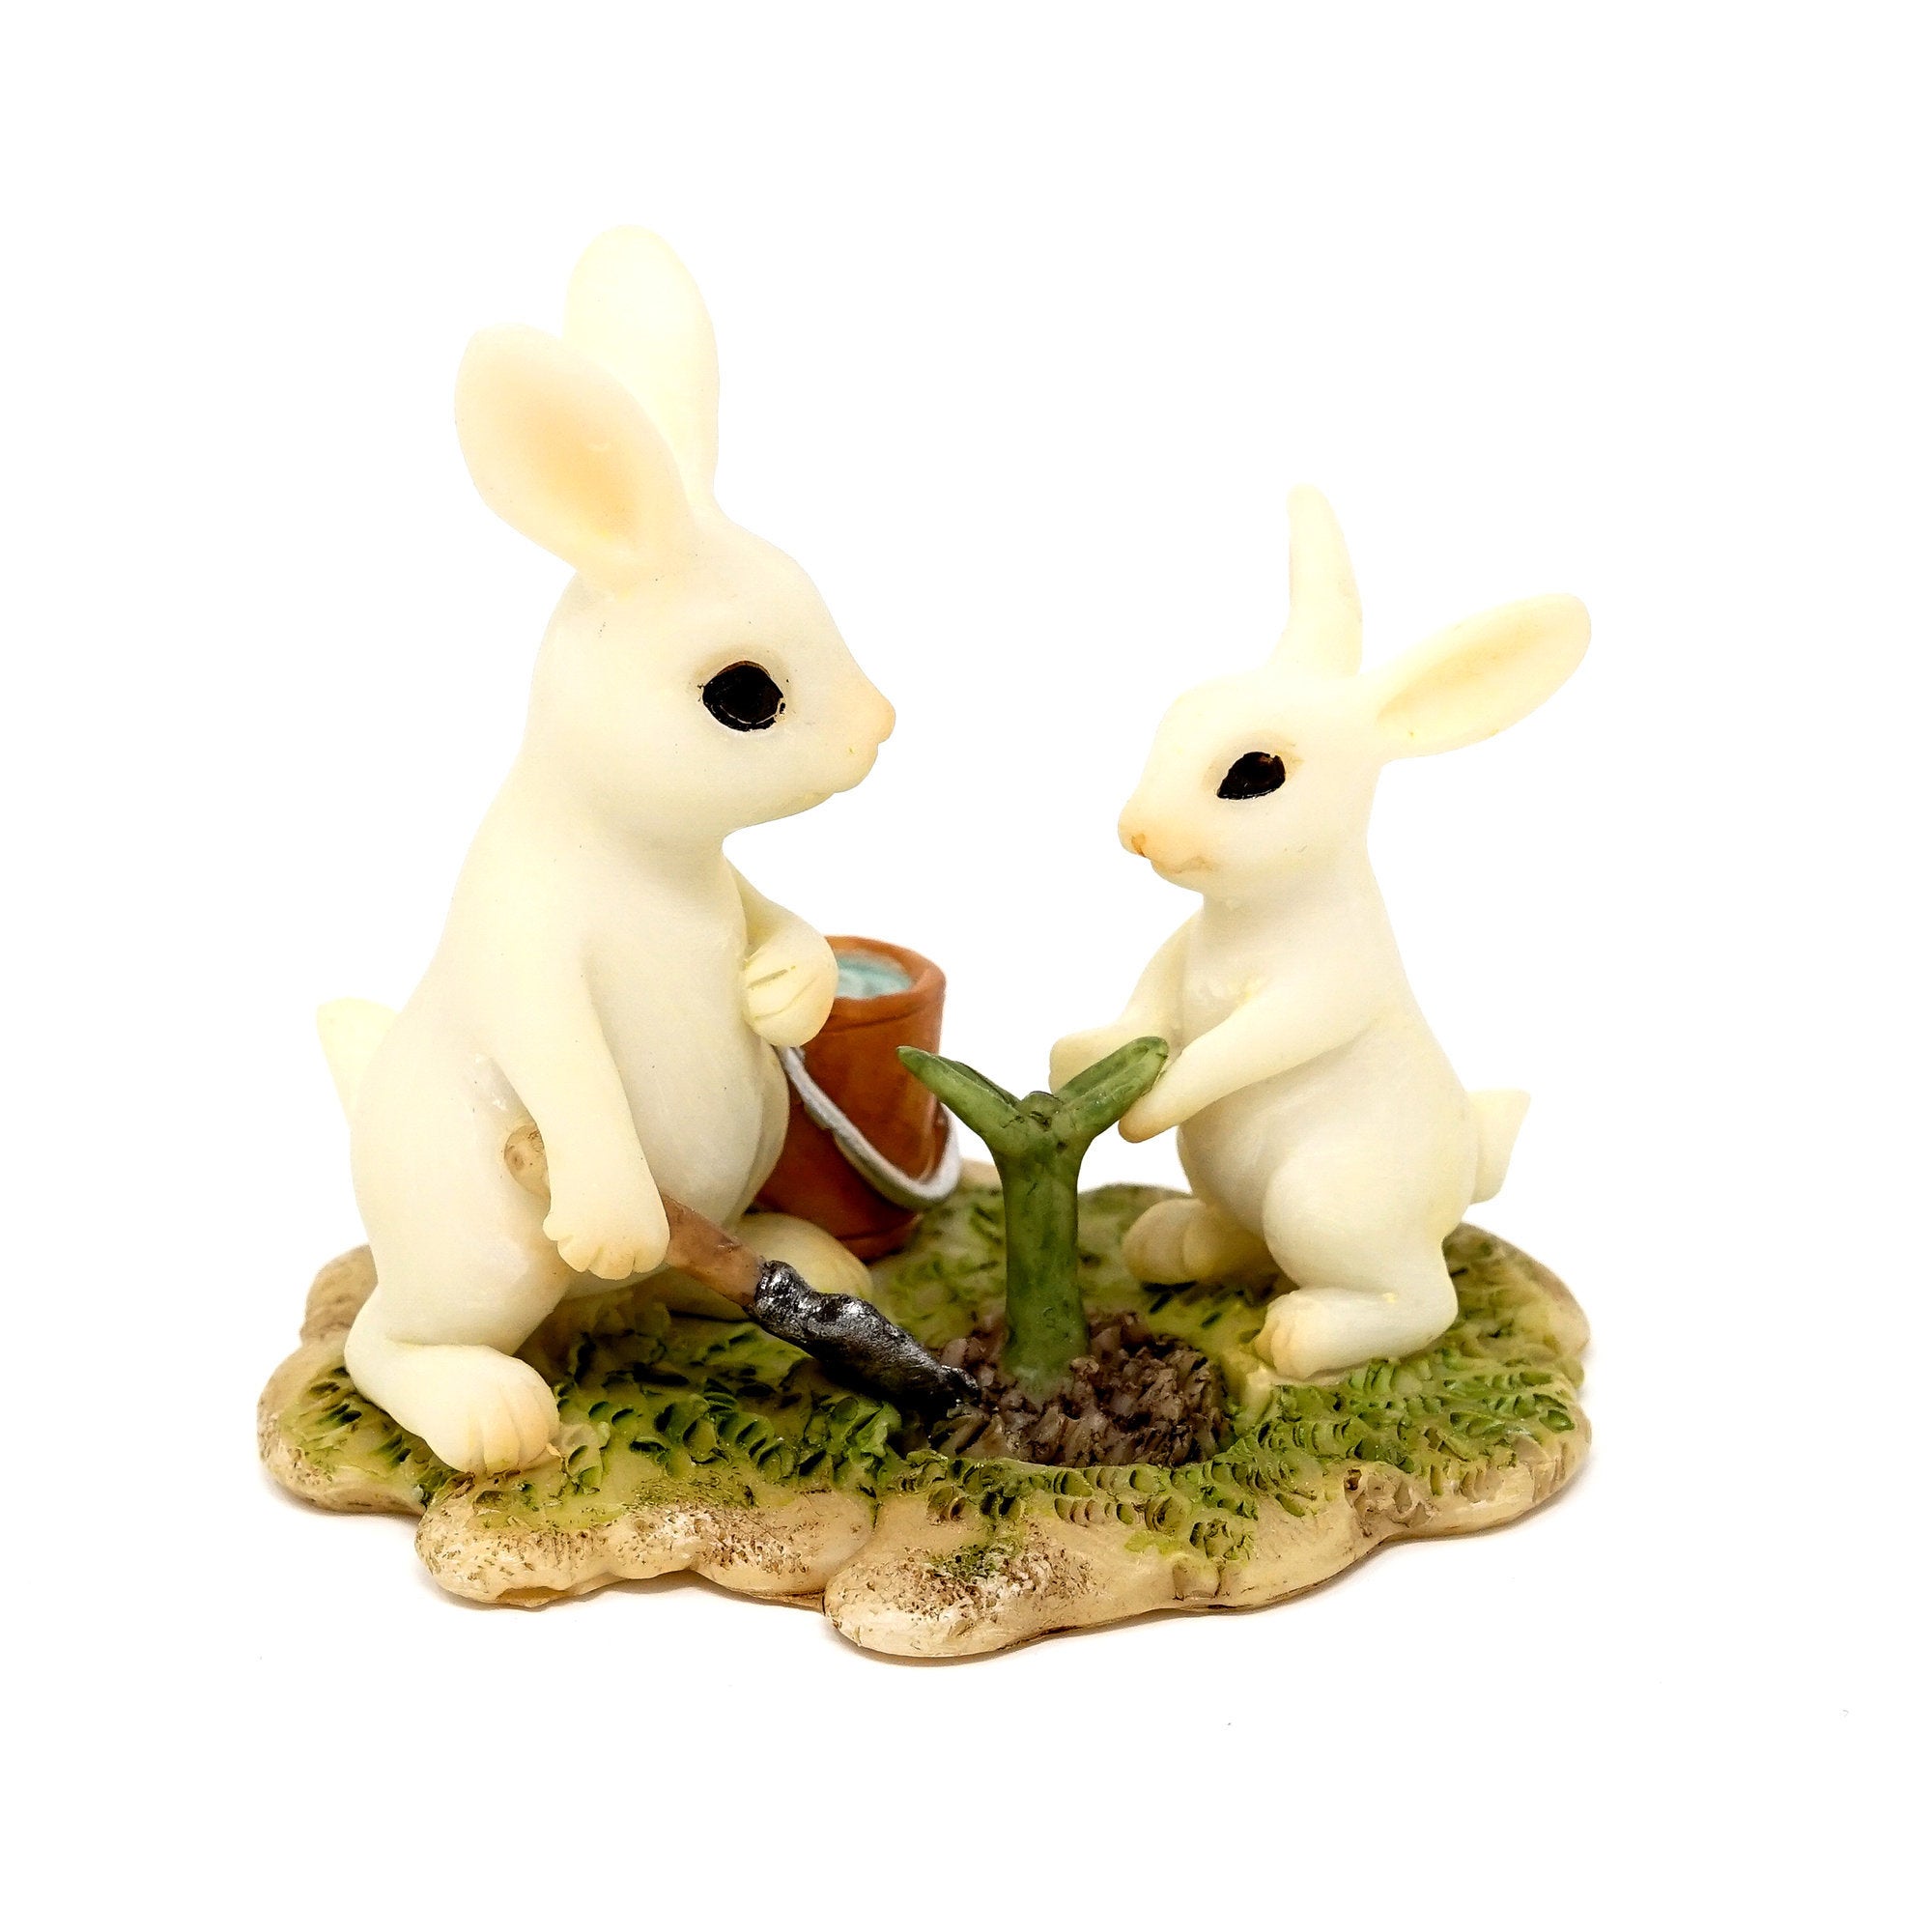 Bunny Gardener Planting Cutting with Little Bunny, Mini Bunny, Mini Rabbit, Fairy Garden Bunny, Fairy Garden Rabbit, Bunny Gardeners, Fairy Garden - image 1 of 4